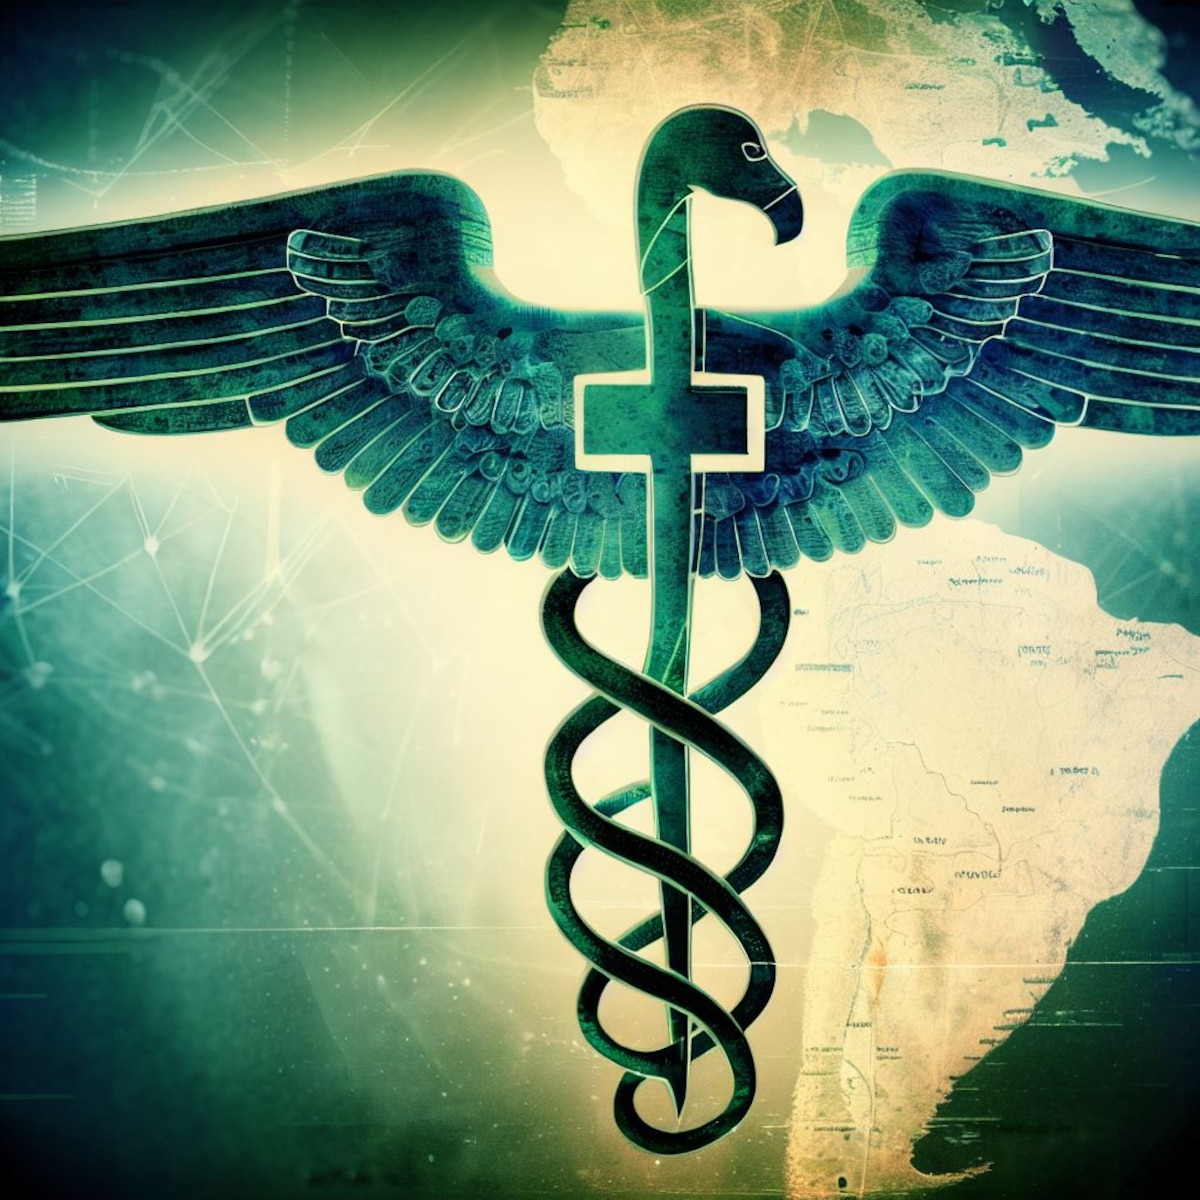 A Caduceus superimposed over a map of South America